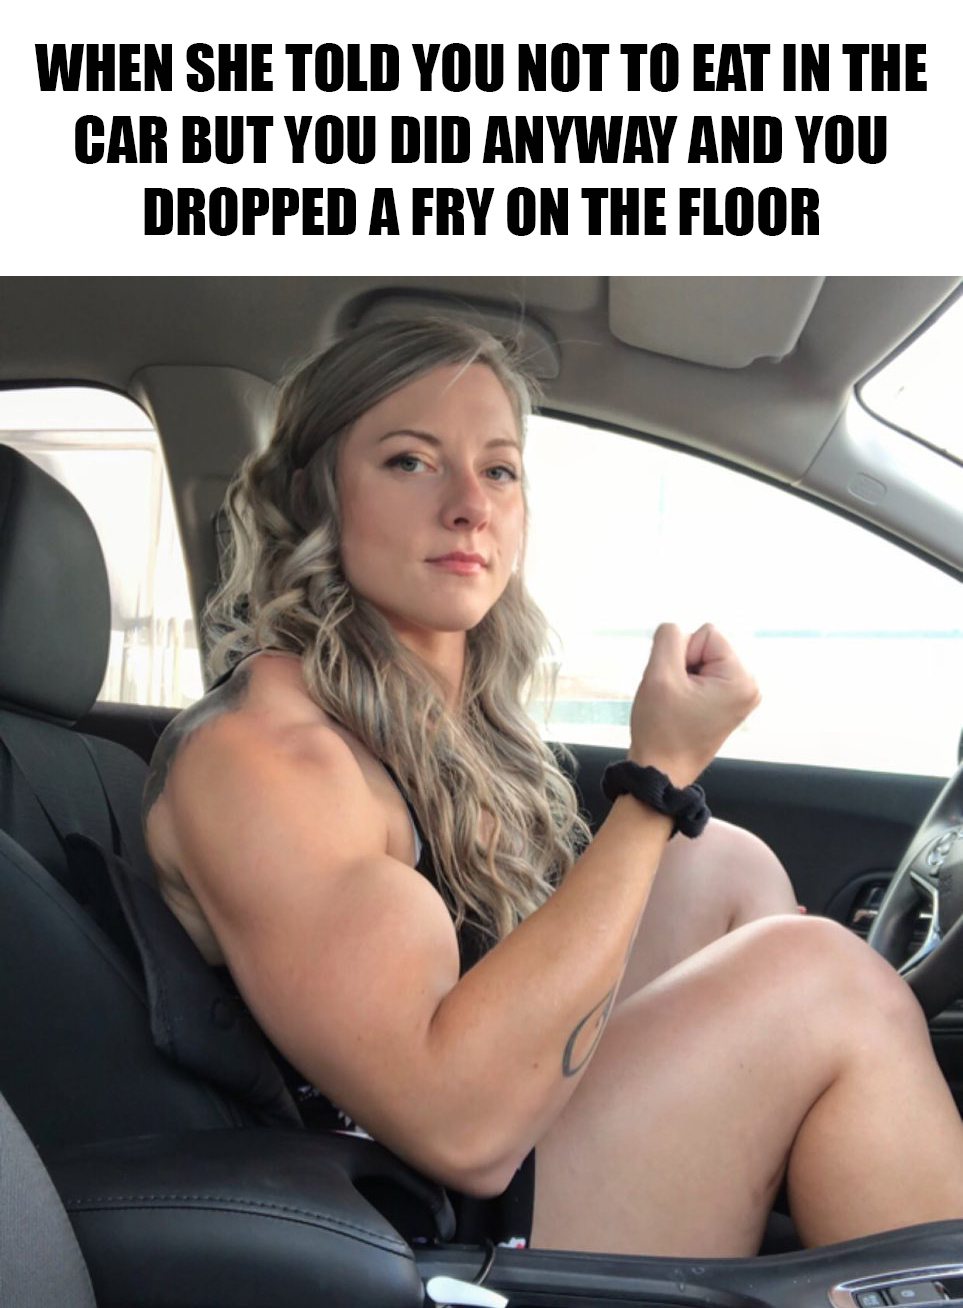 funny memes - dank memes - rachel plumb - When She Told You Not To Eat In The Car But You Did Anyway And You Dropped A Fry On The Floor